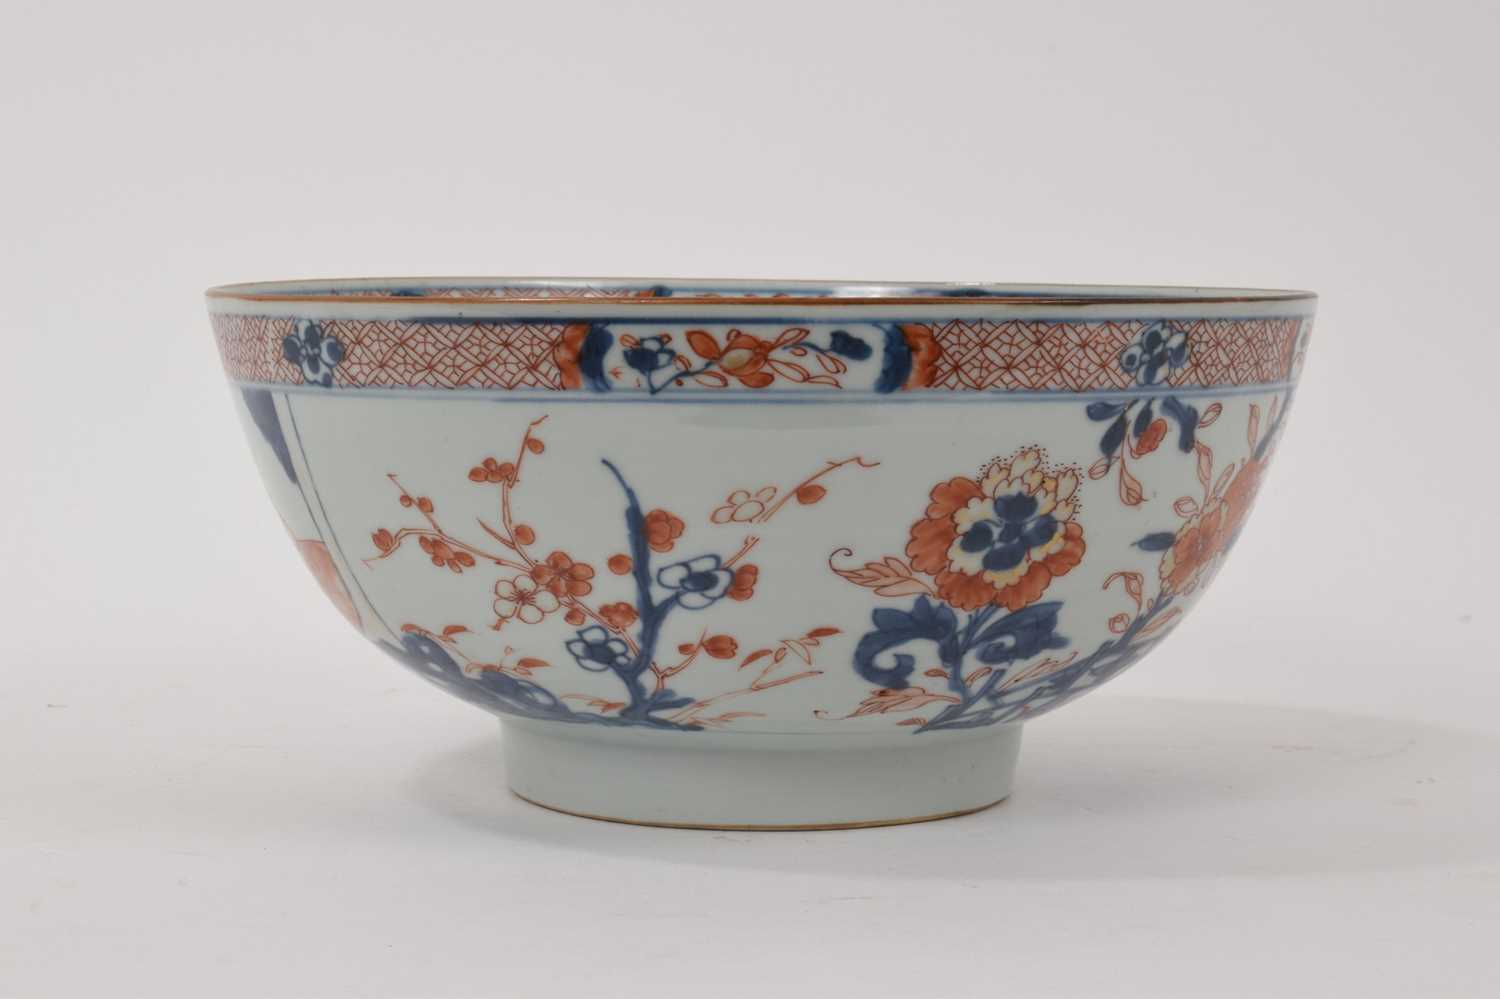 Unusual antique Chinese Imari porcelain bowl with panel of censer and ruyi scepter - Image 2 of 5